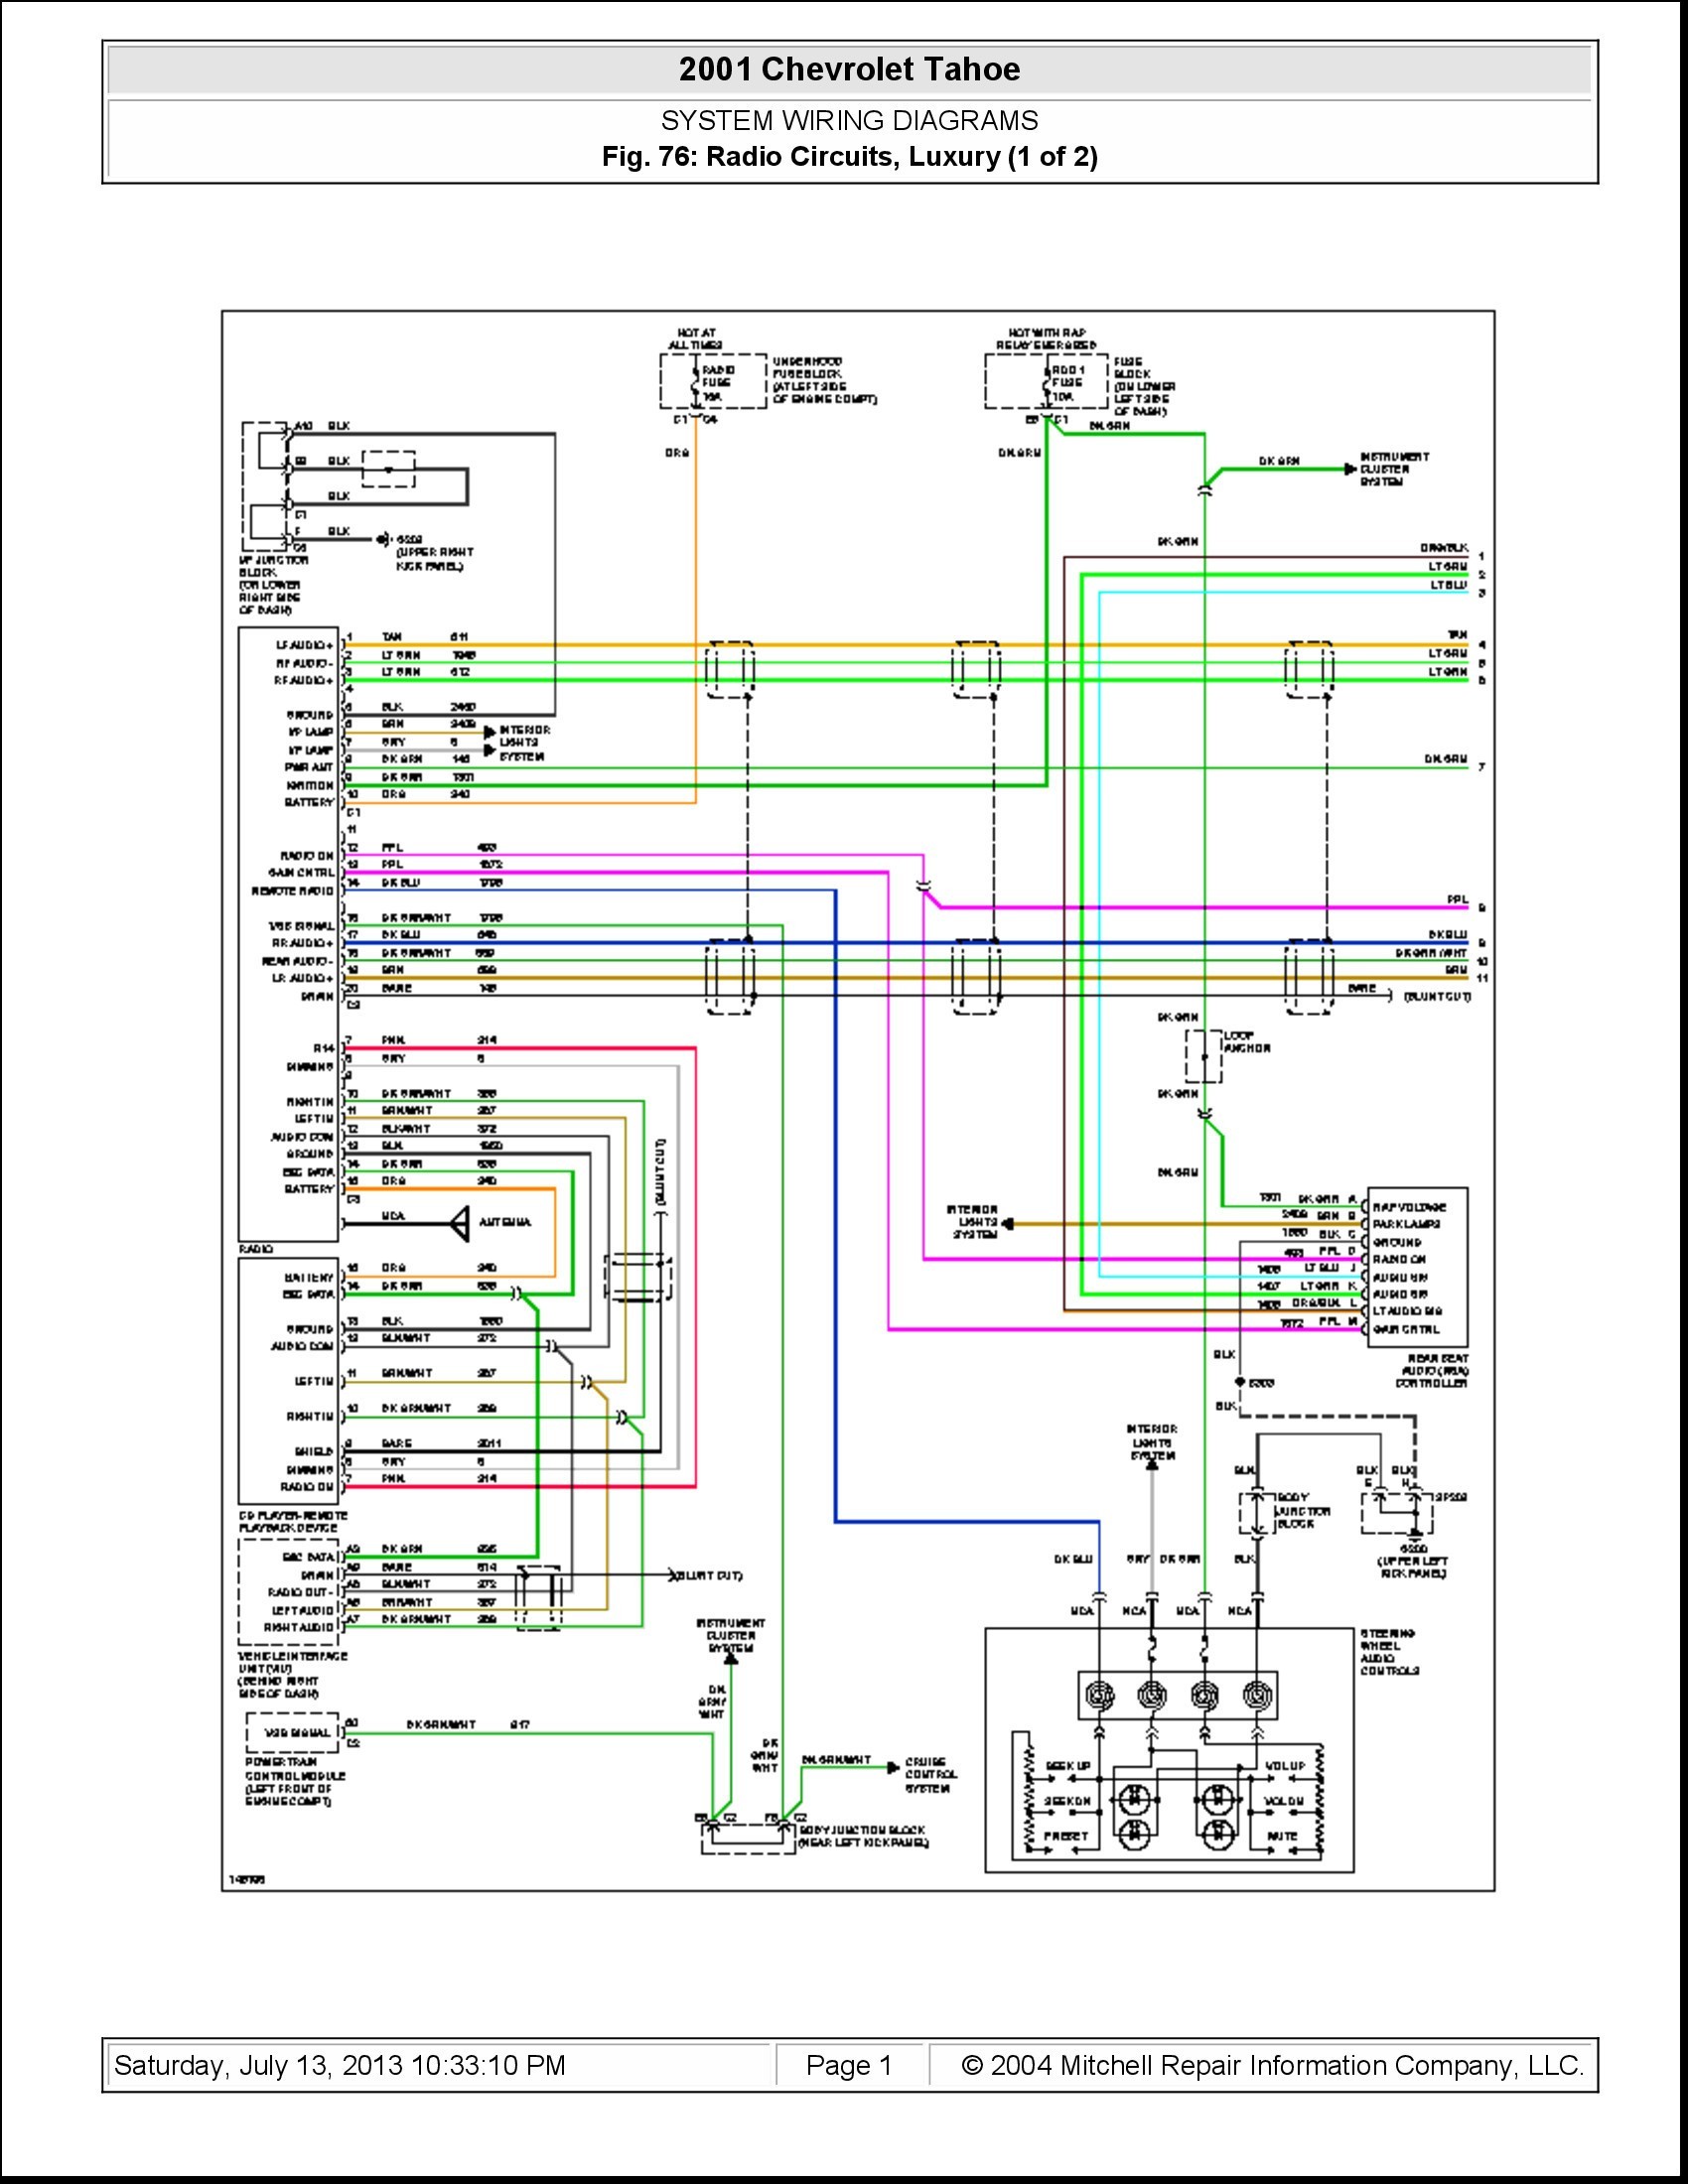 Chevy S10 Wiring Diagram Chevy S10 Wiring Schematic Wiring Diagram toolbox Of Chevy S10 Wiring Diagram